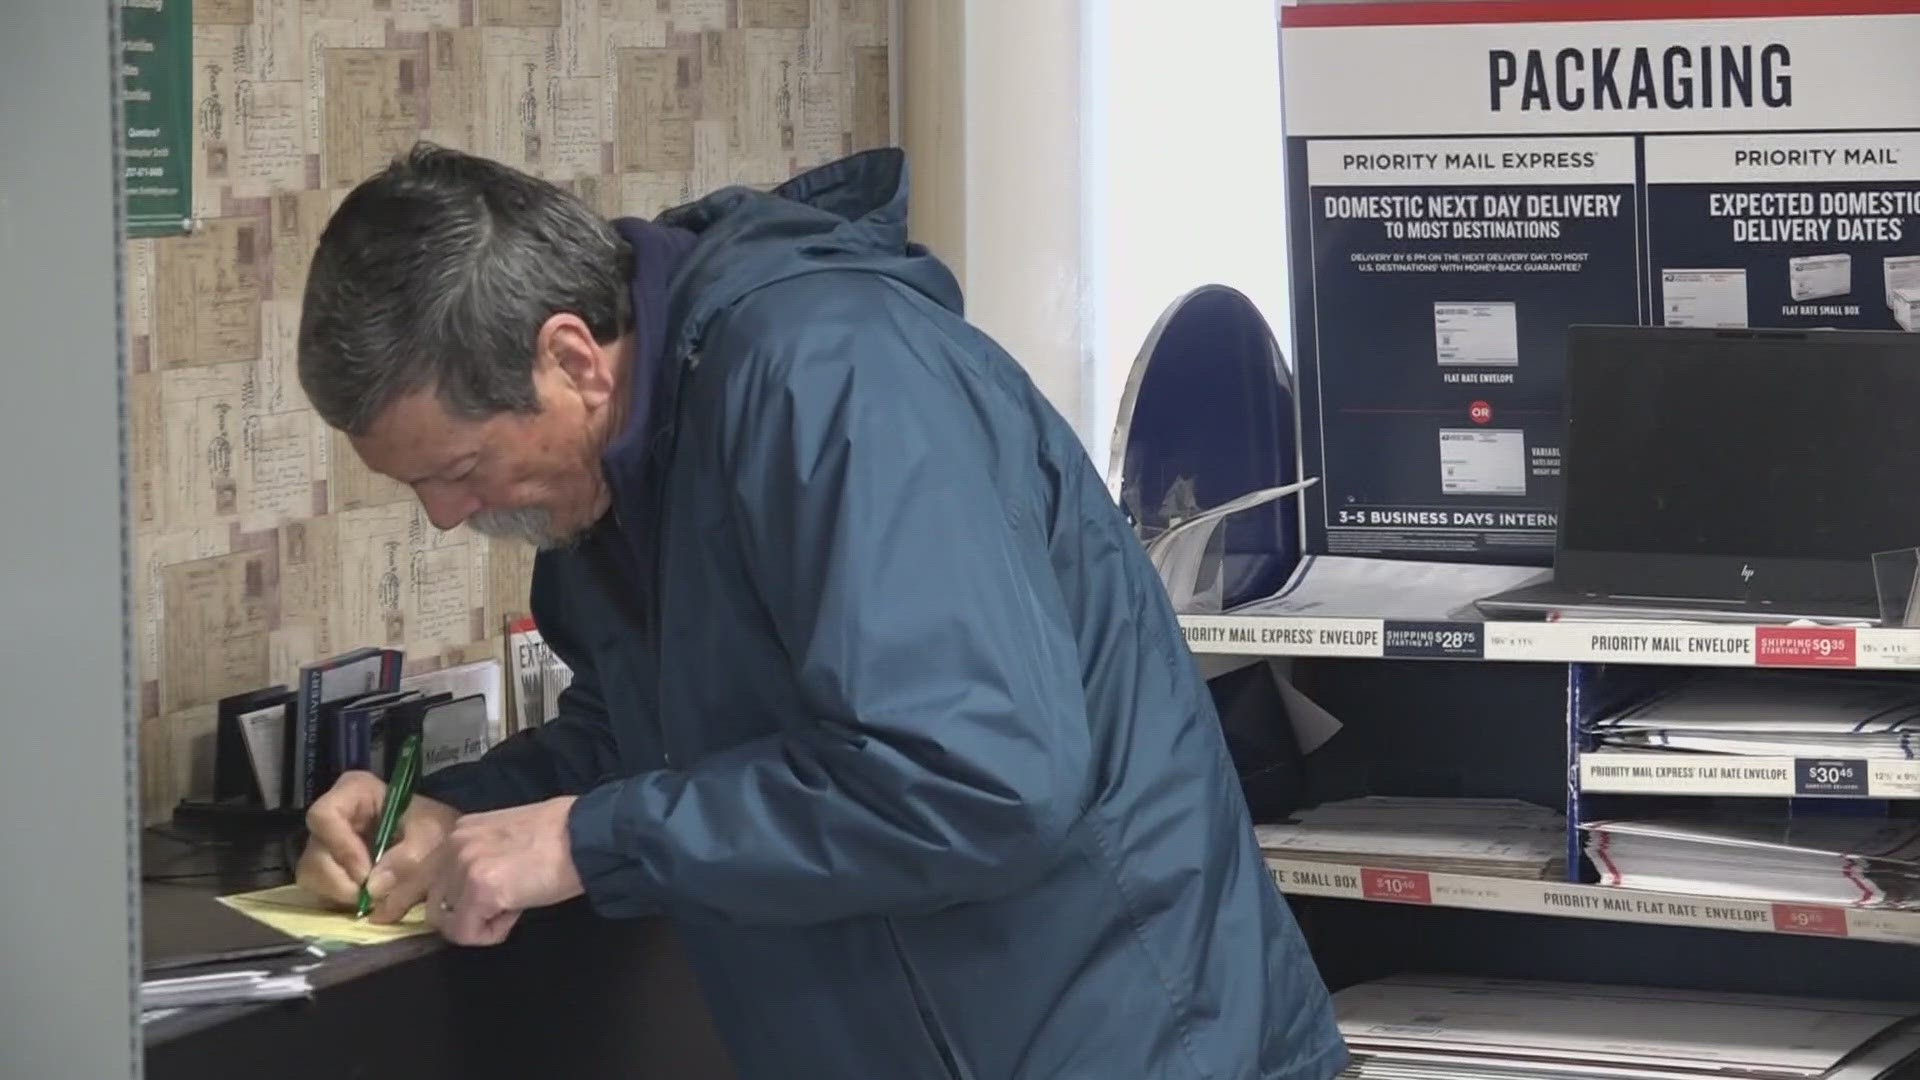 Sens. Angus King and Susan Collins as well as Rep. Jared Golden signed a letter to U.S. Postmaster Louis DeJoy detailing their concerns about potential impacts.